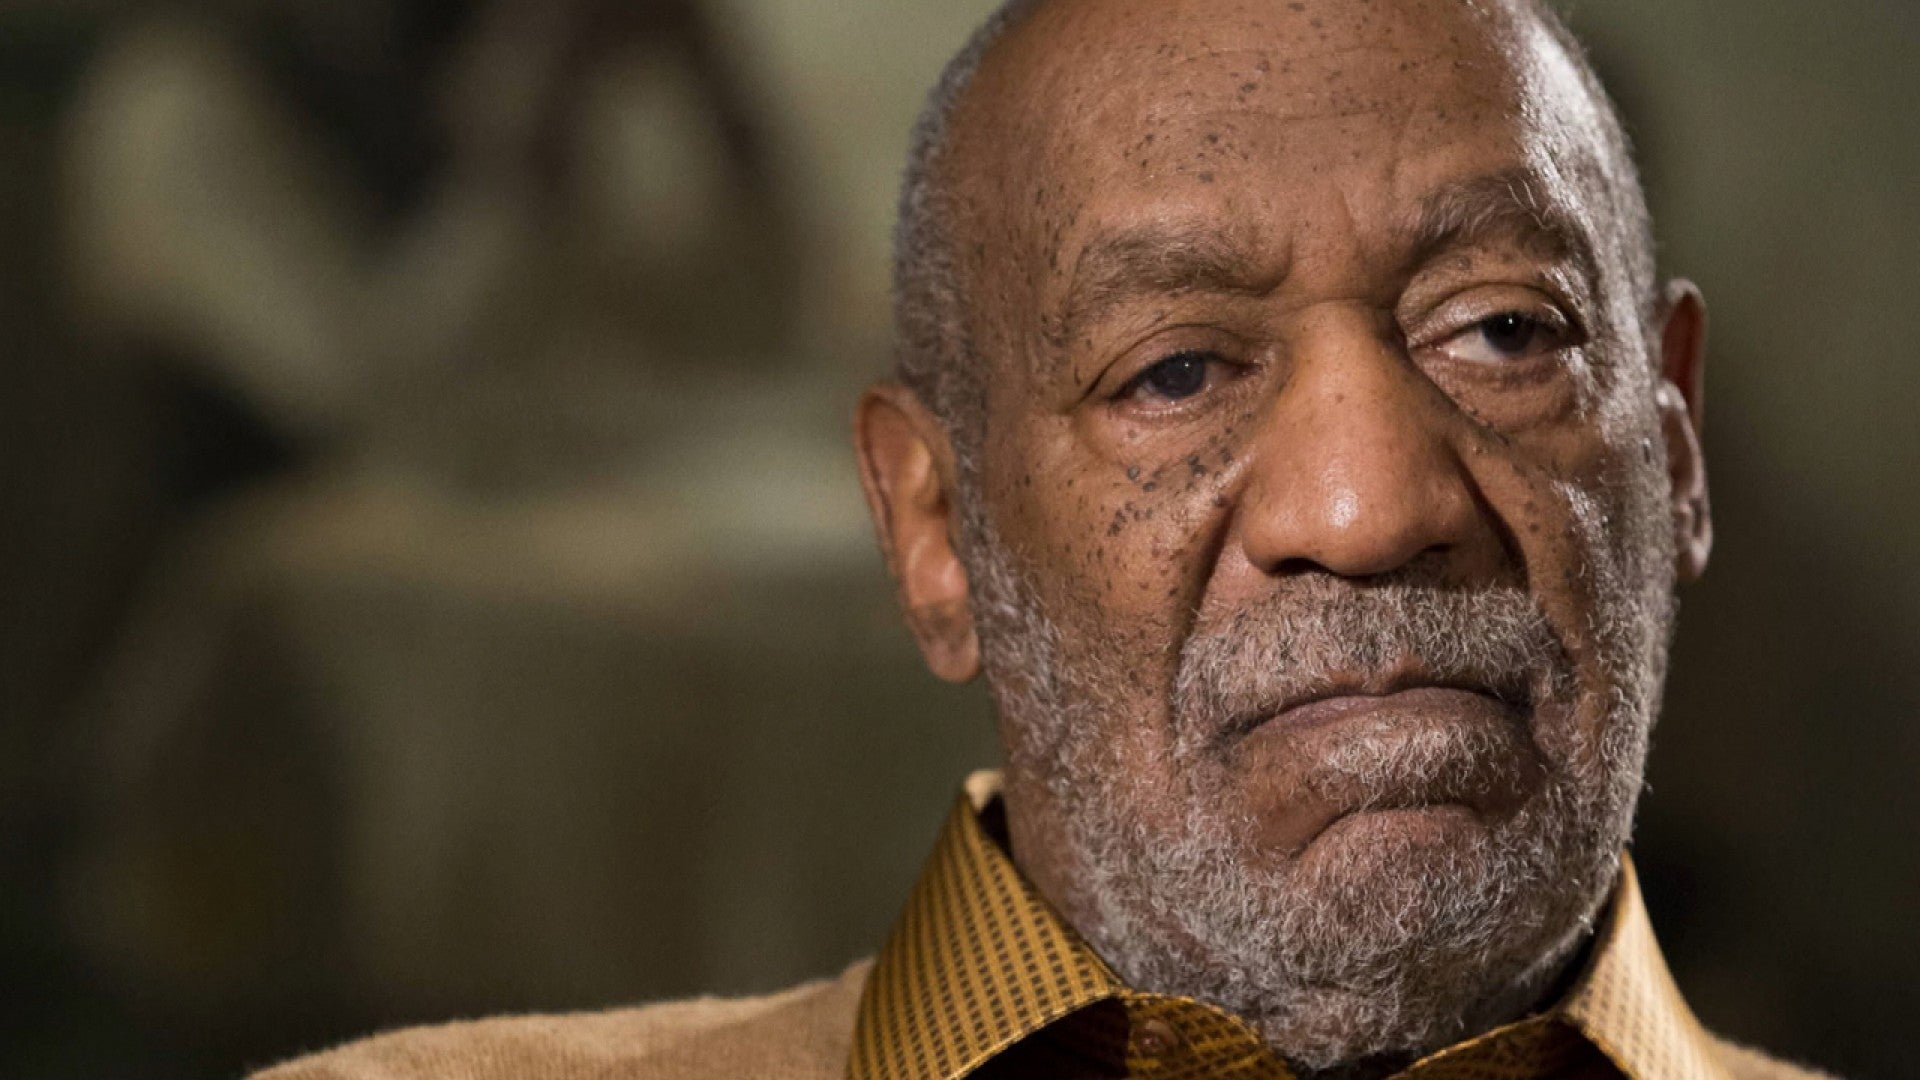 Bill Cosby Admitted Under Oath To Obtaining Quaaludes To Give To Young Women In 2005